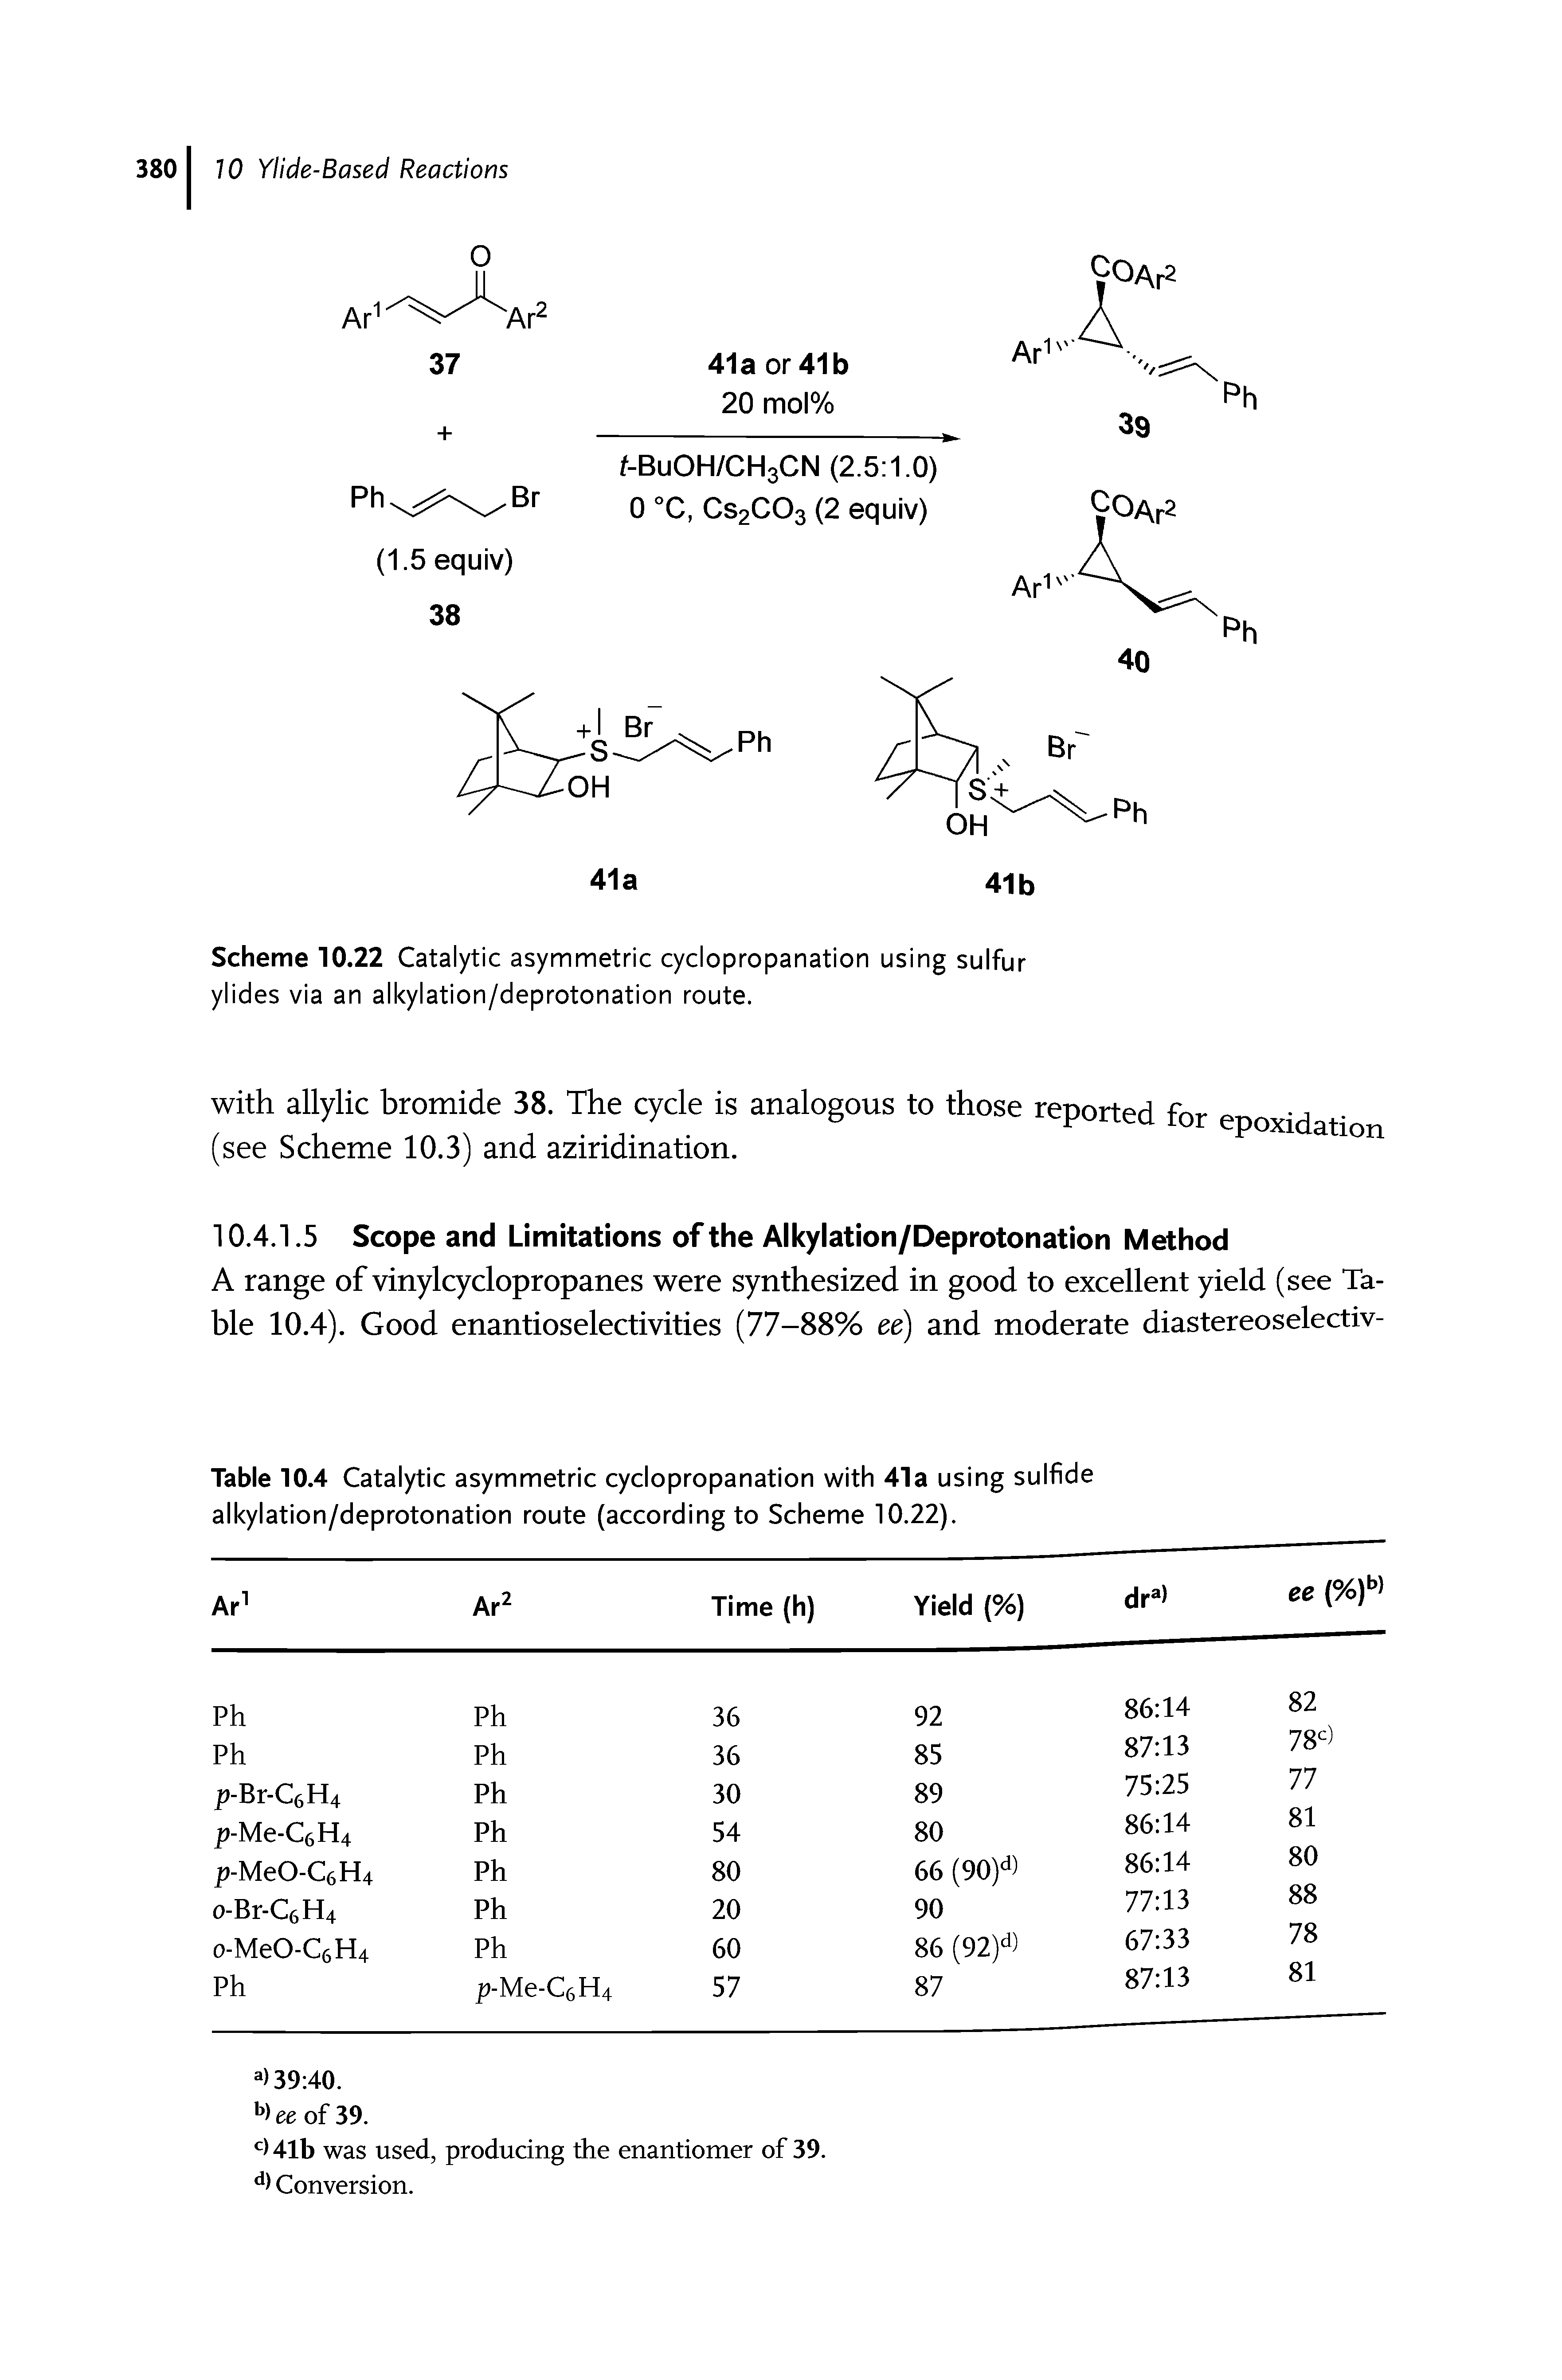 Table 10.4 Catalytic asymmetric cyclopropanation with 41a using sulfide alkylation/deprotonation route (according to Scheme 10.22).